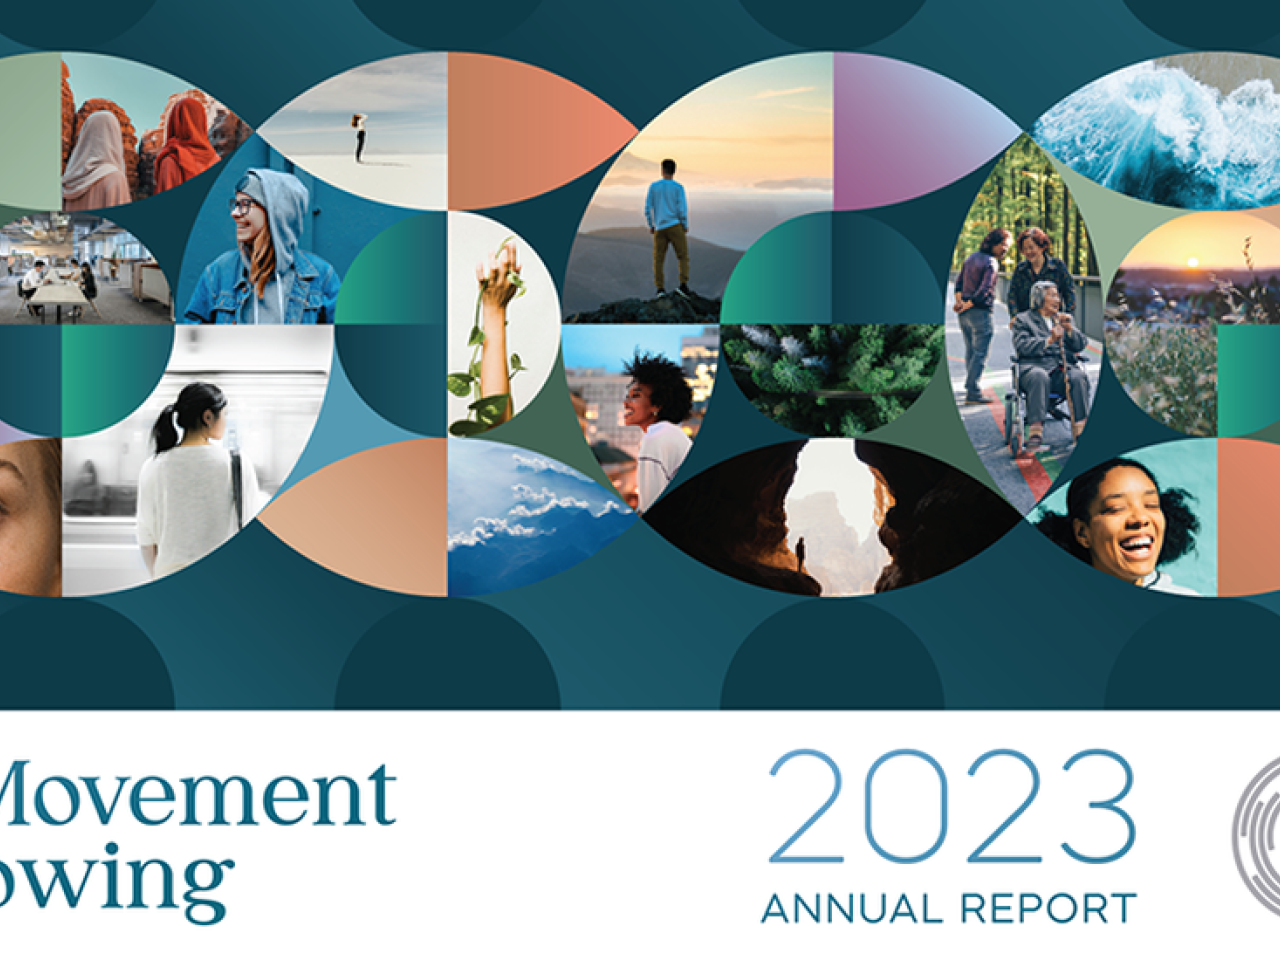 Our Movement is Growing 2023 Annual Report